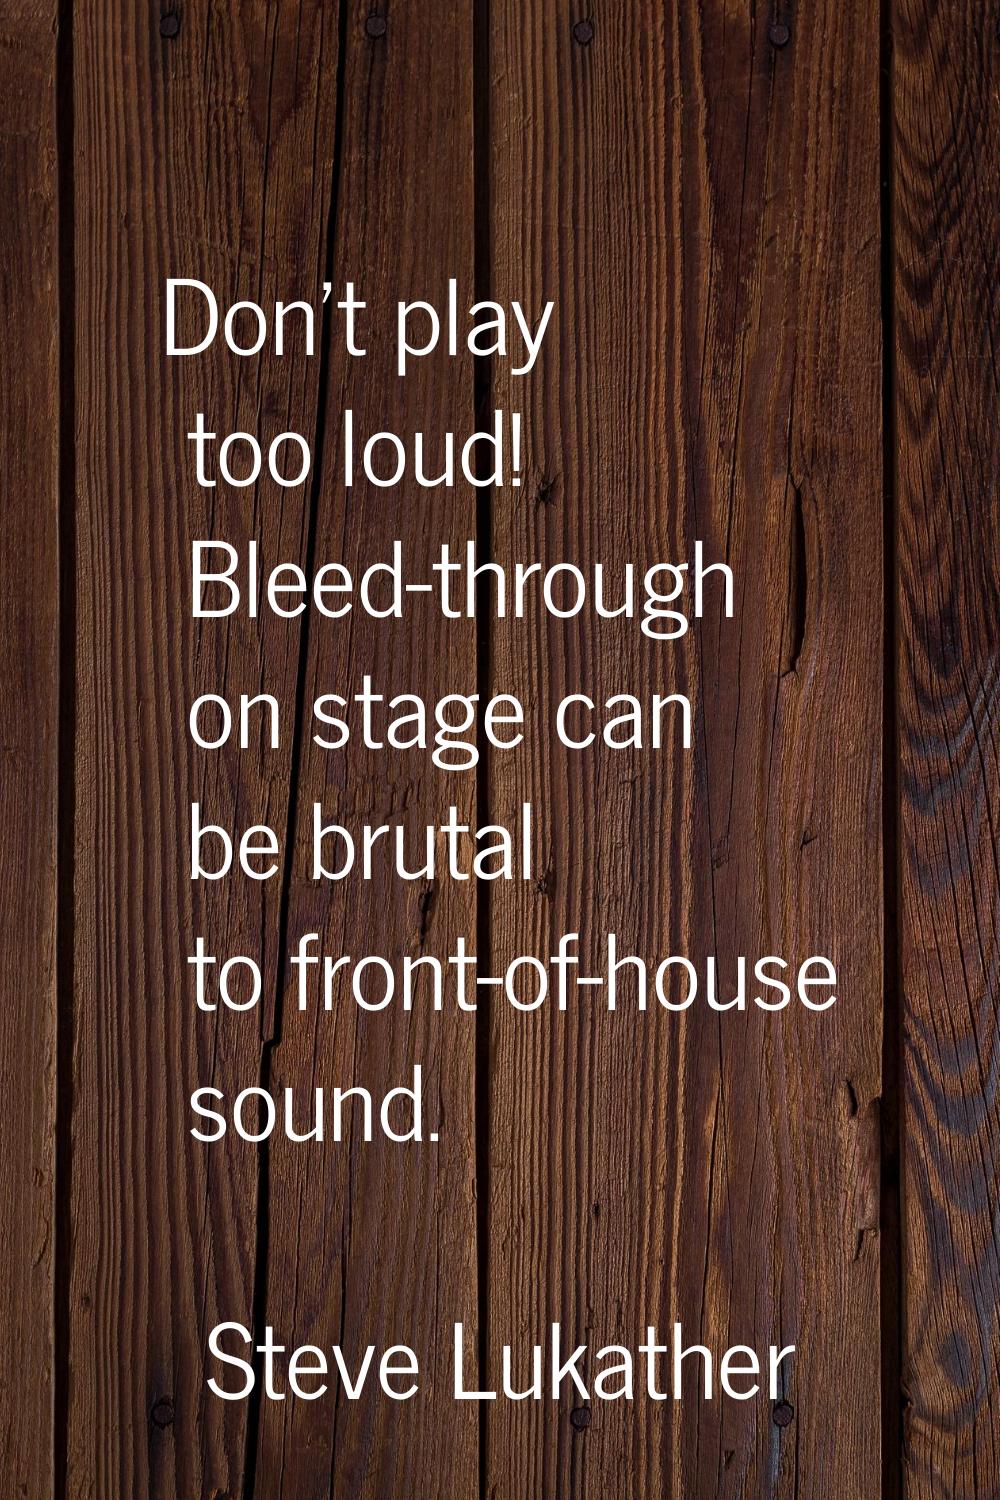 Don't play too loud! Bleed-through on stage can be brutal to front-of-house sound.